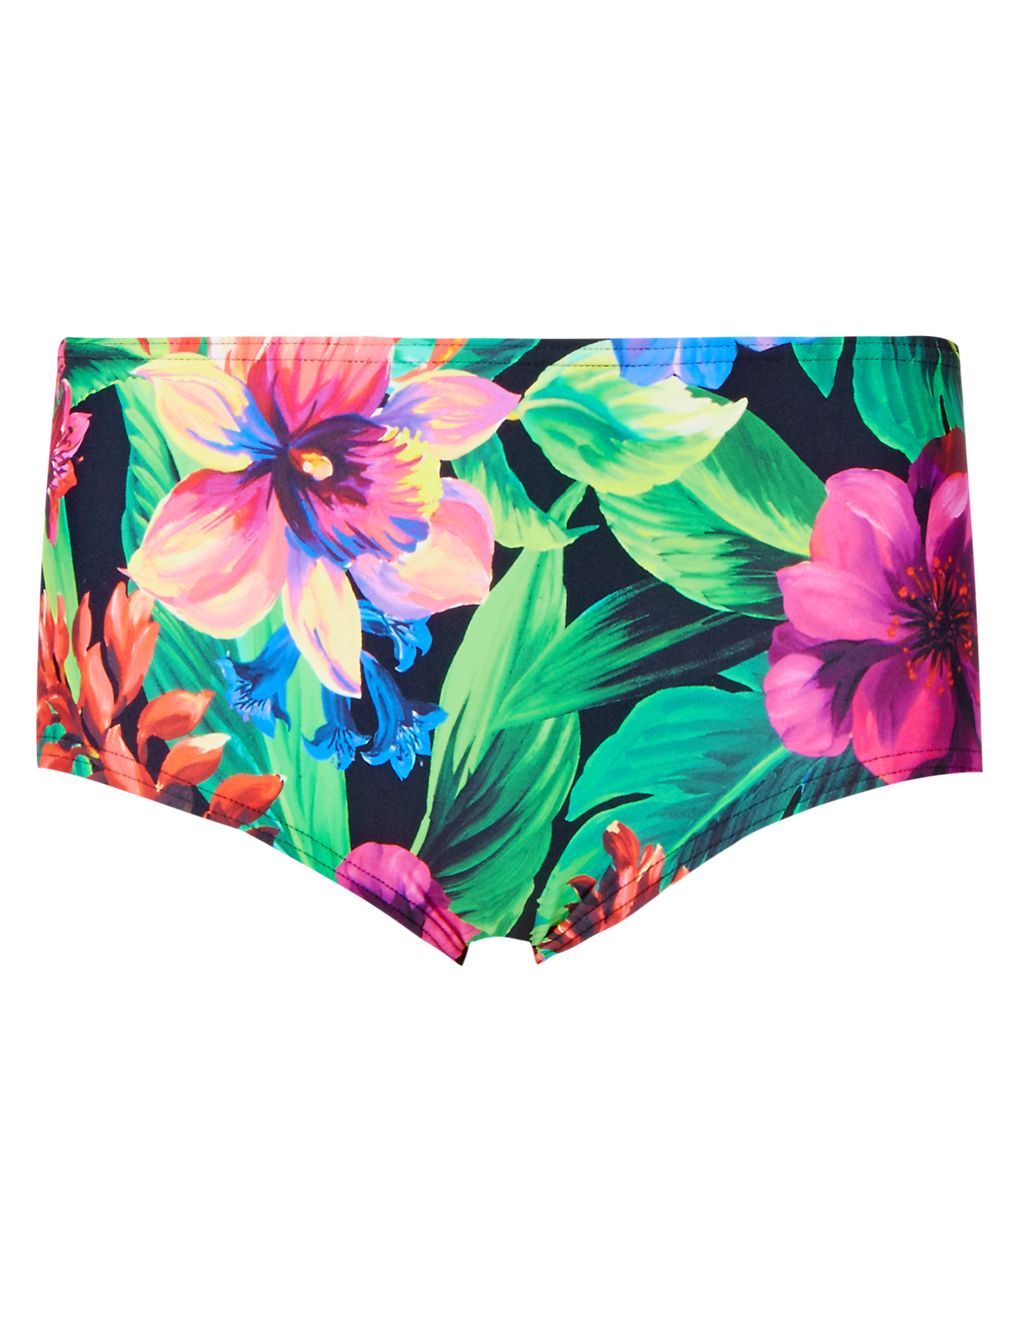 Exotic Floral Shorts Style Bikini Bottoms 1 of 3